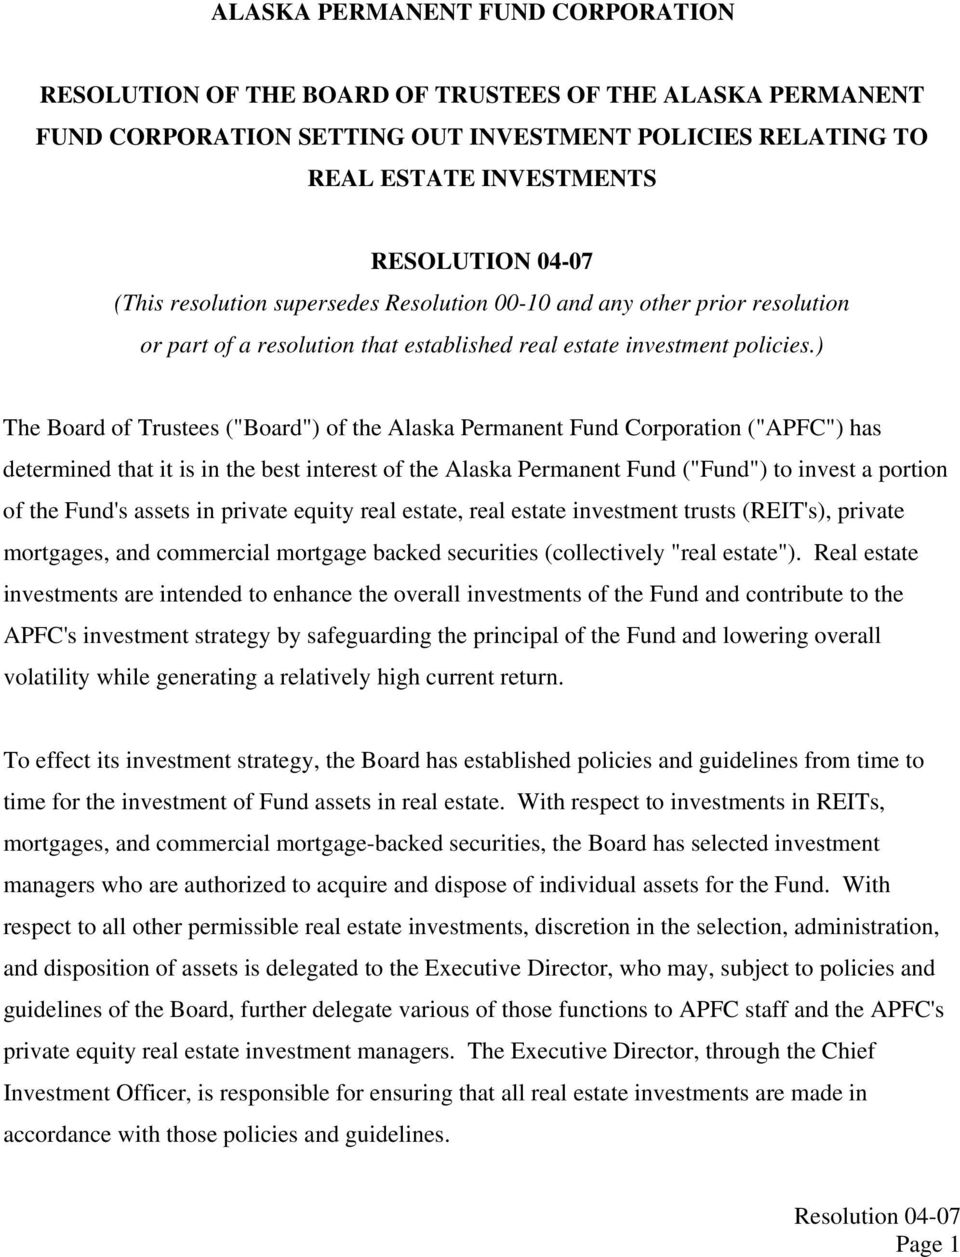 ) The Board of Trustees ("Board") of the Alaska Permanent Fund Corporation ("APFC") has determined that it is in the best interest of the Alaska Permanent Fund ("Fund") to invest a portion of the